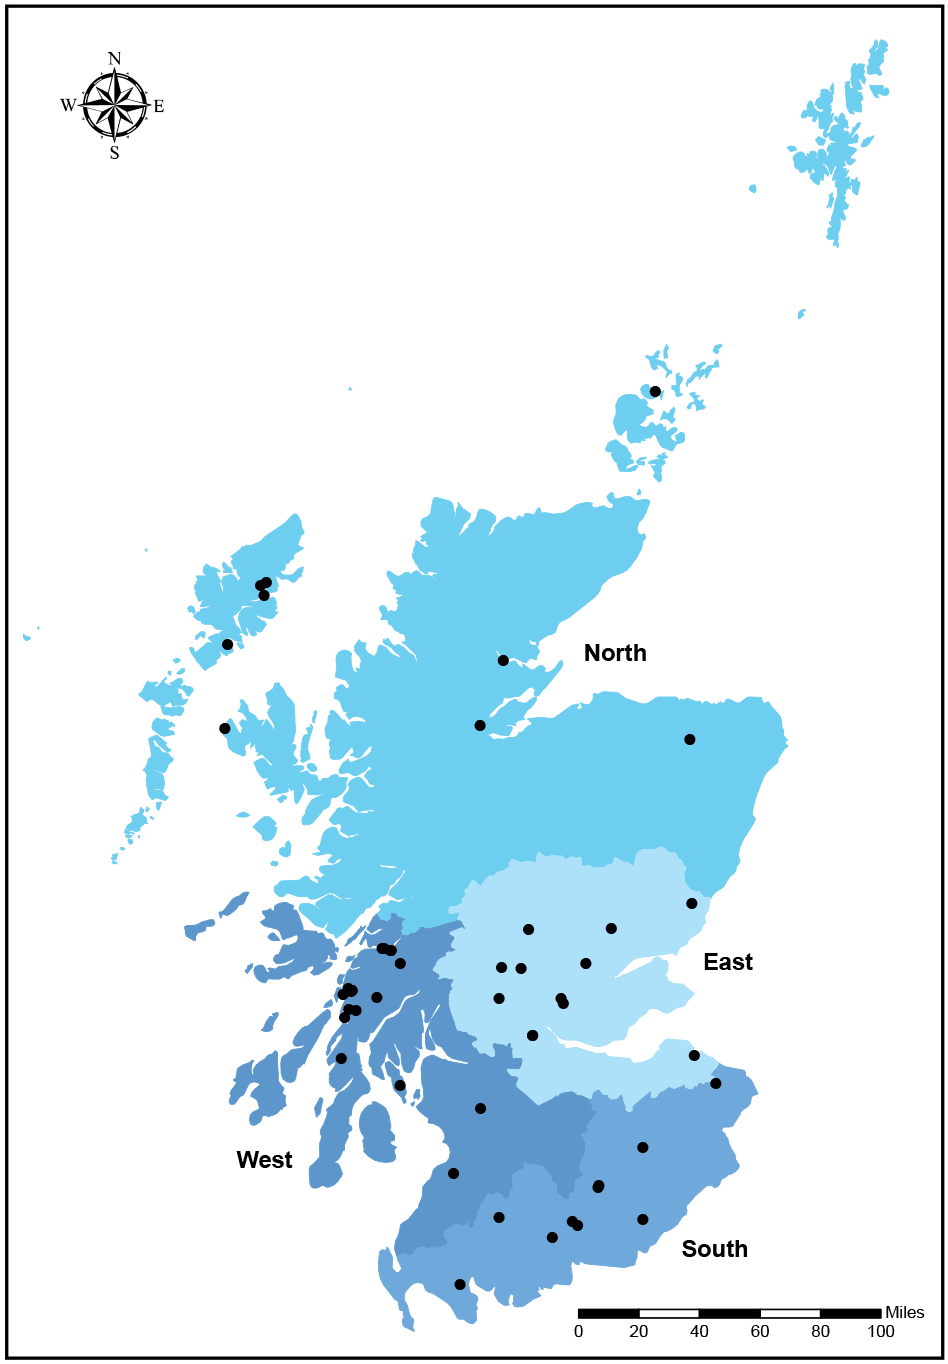 This is a map showing the distribution of active rainbow trout sites in Scotland in 2021. The map is split into 4 areas: North, East, West and South and has black dots showing where each site is on the map.
